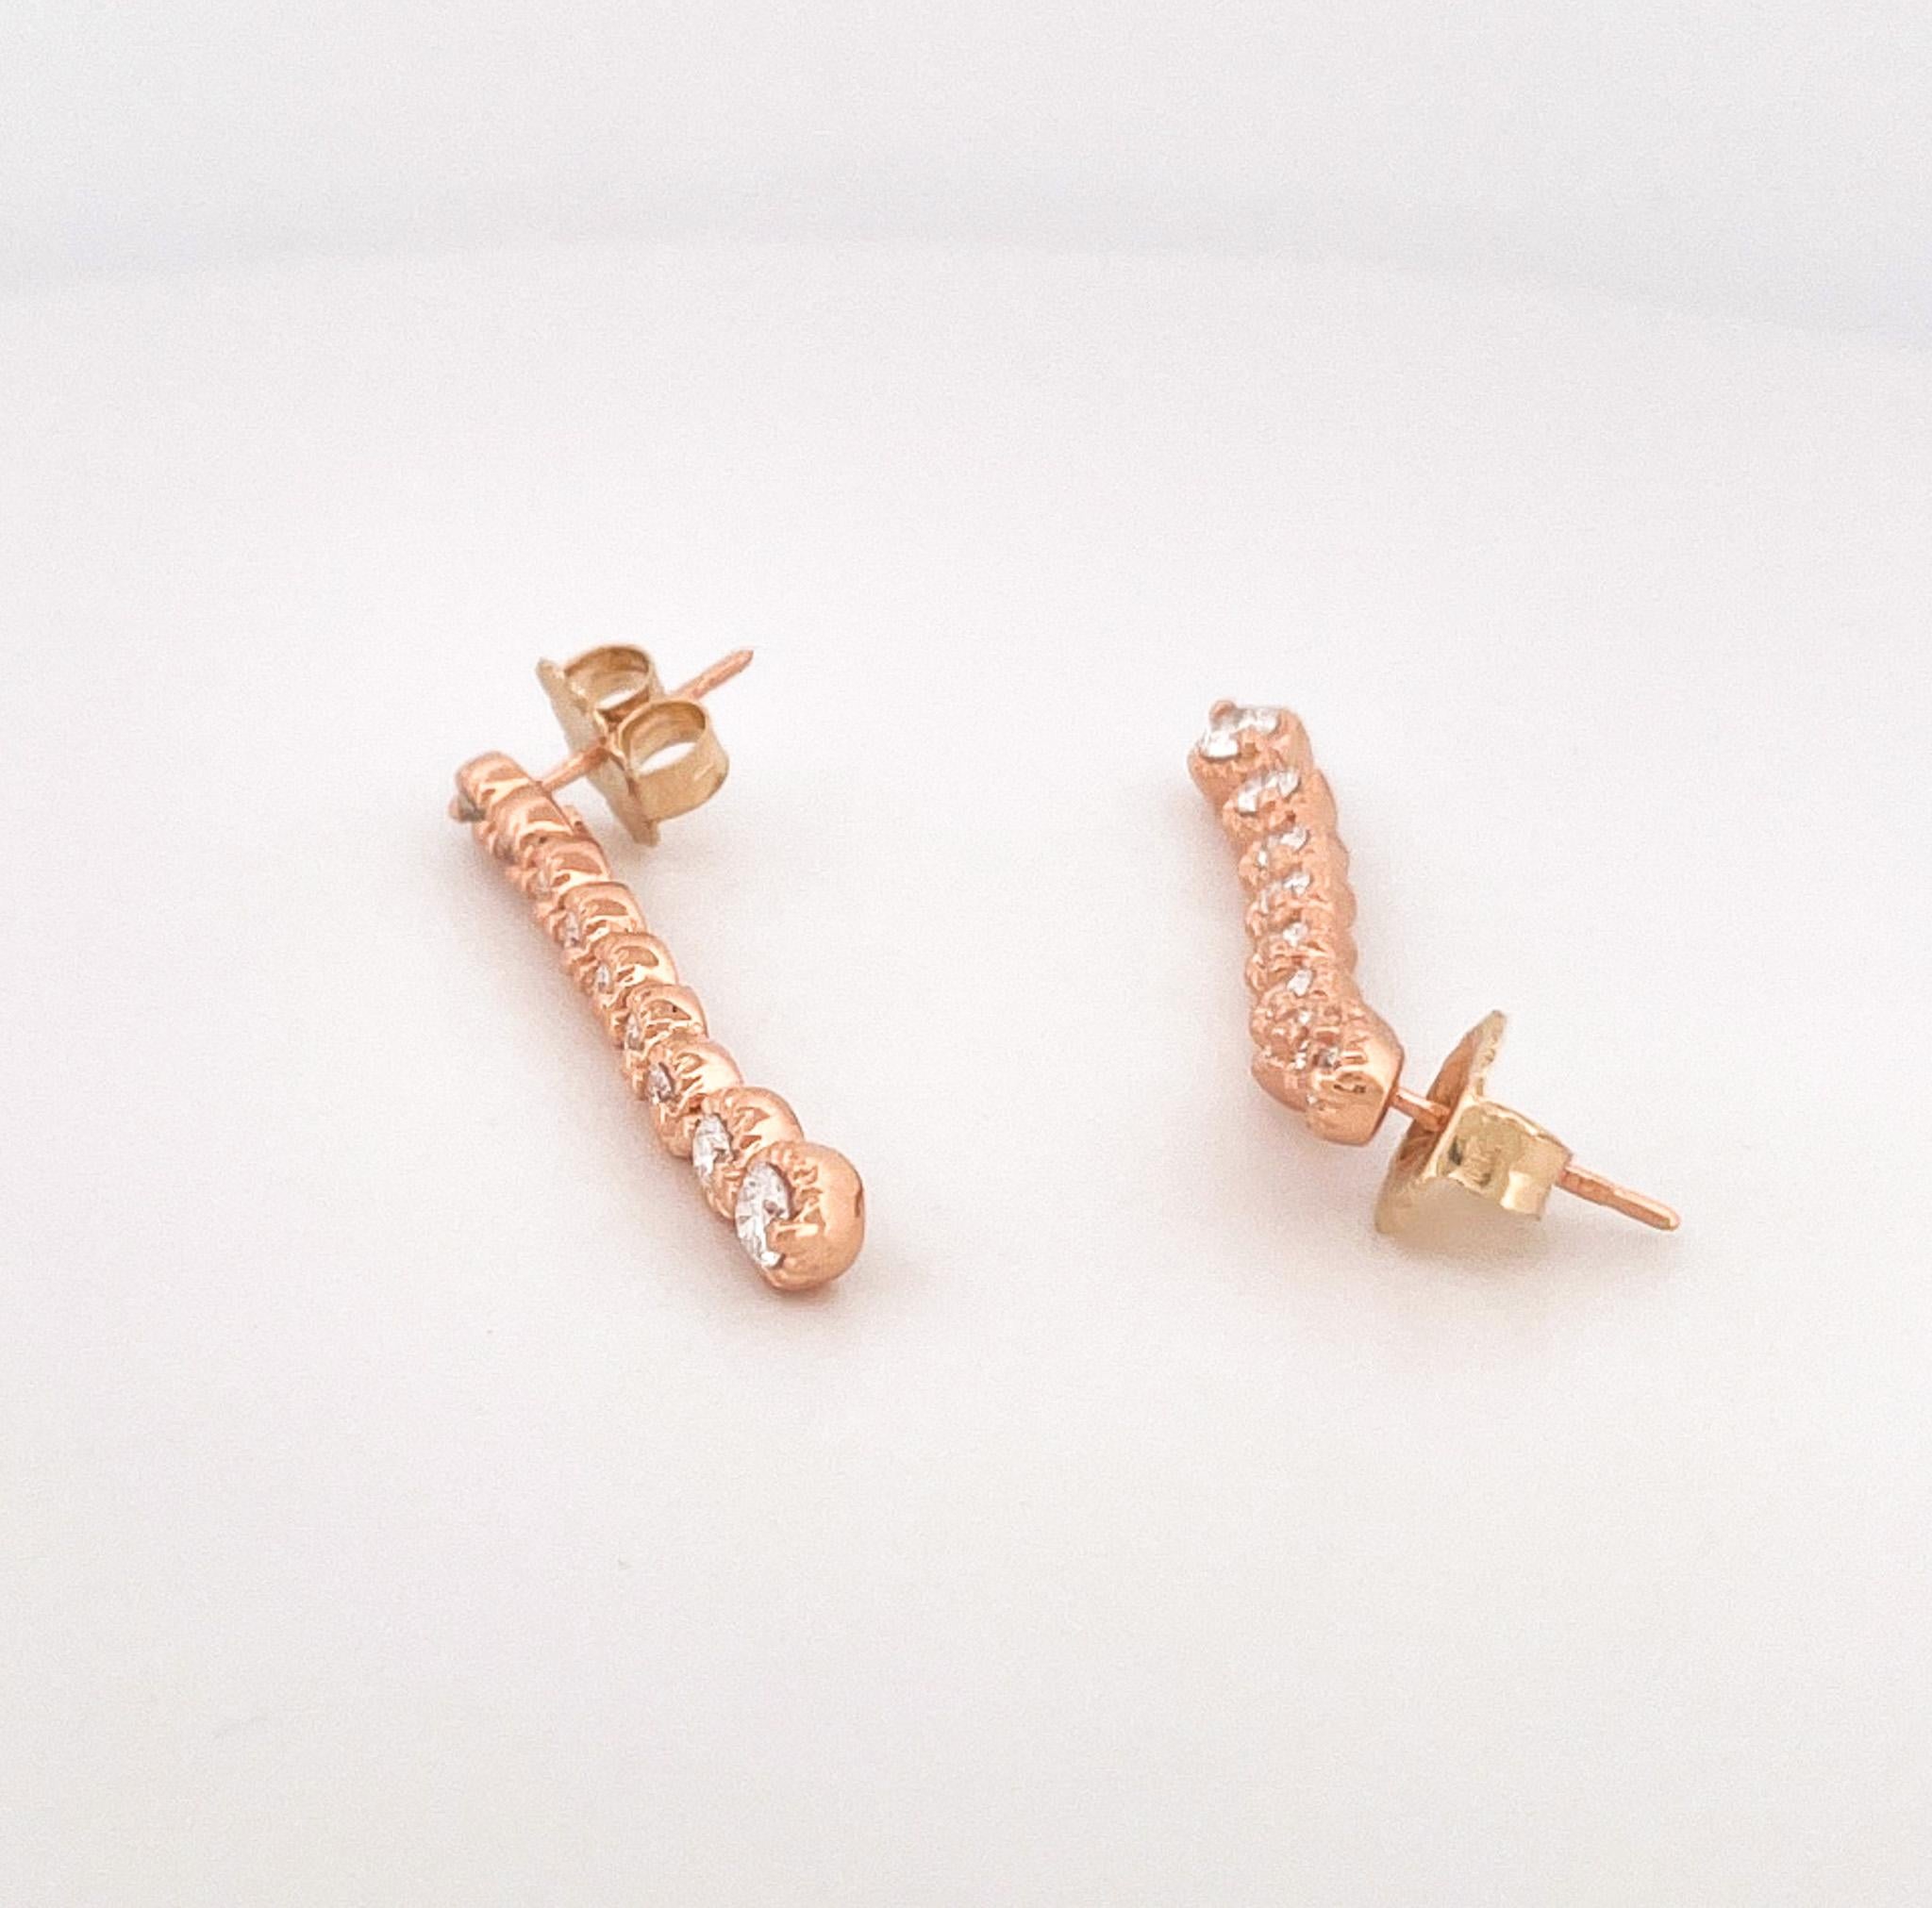 Estate Roberto Coin Cento Florentine 18k Rose Gold Diamond Drop Earrings In Excellent Condition For Sale In Dallas, TX